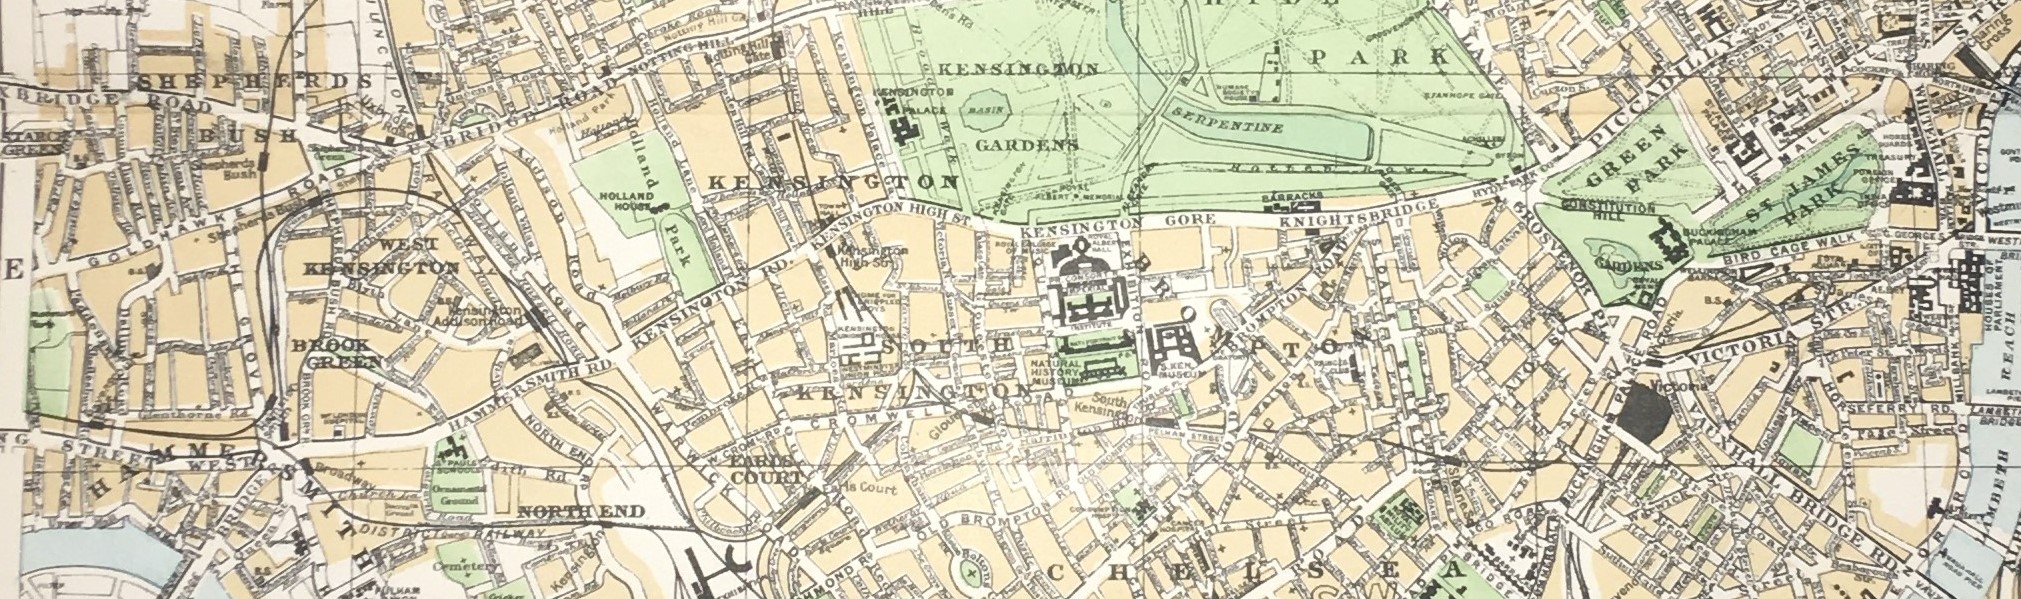 The West End Of London Victorian Street Areas Map GW Bacon 1899. - Image 3 of 5